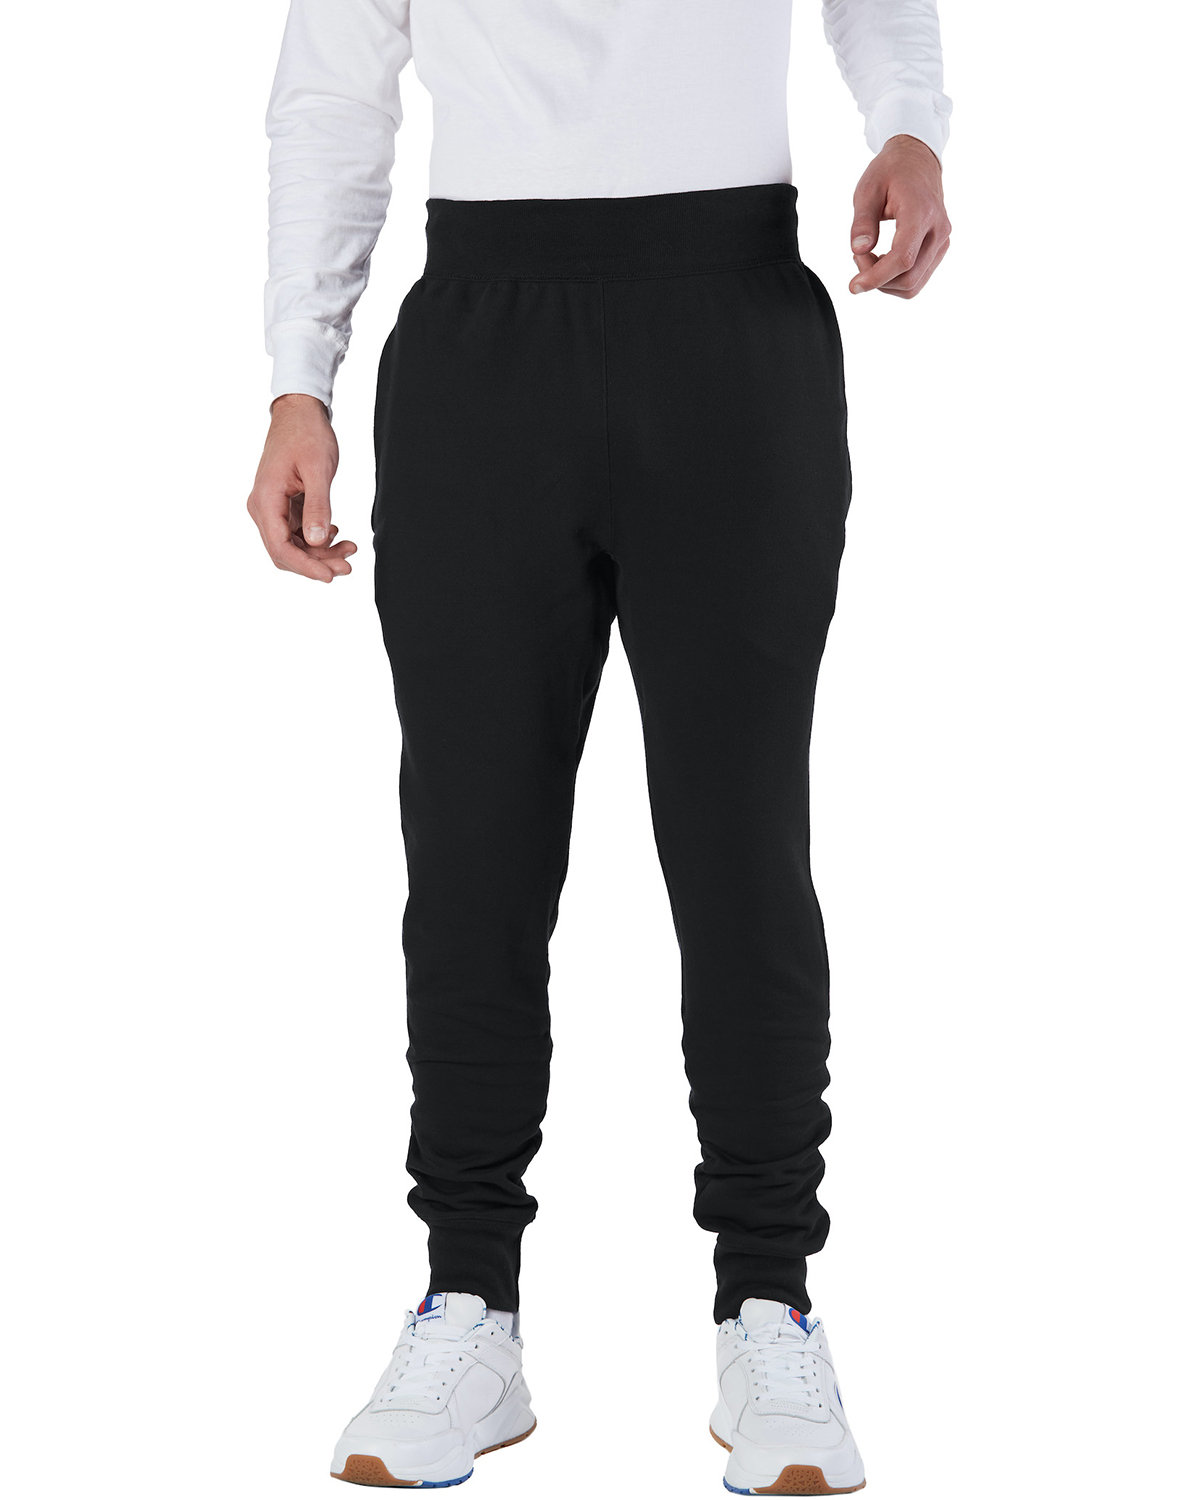 Download 33+ Mens Heather Cuffed Sweatpants Front Left Half-Side ...